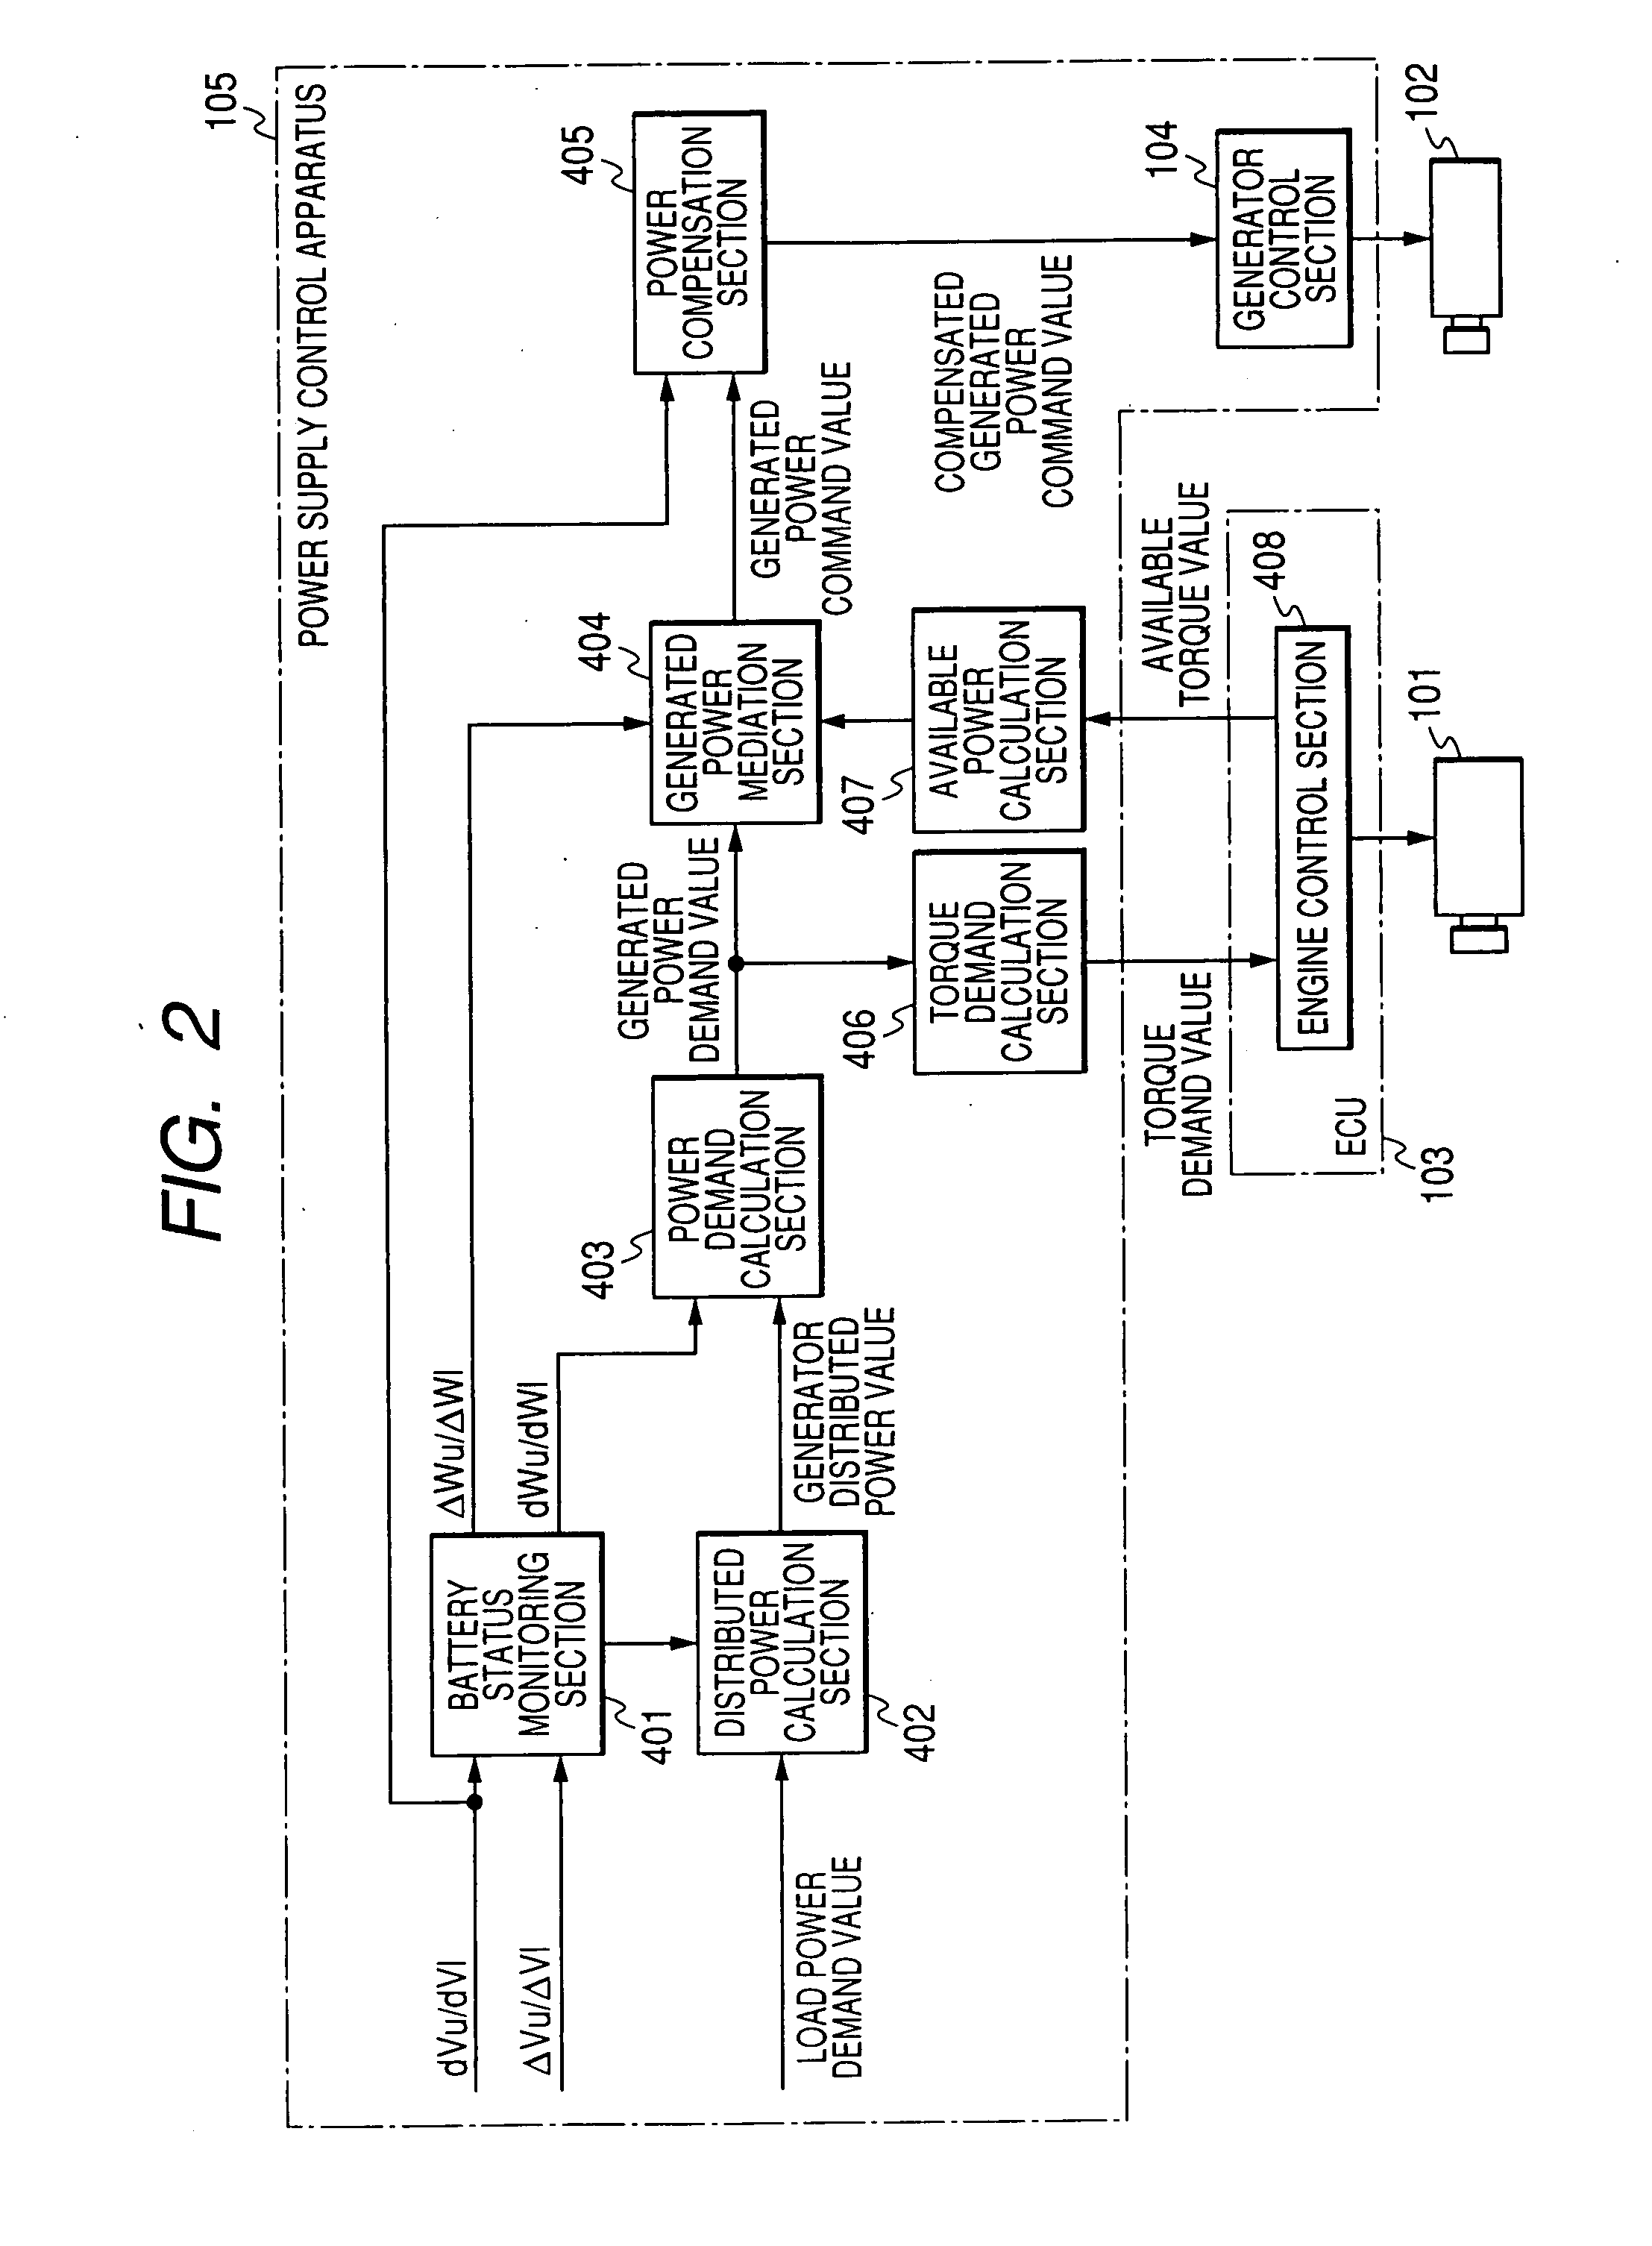 Electrical power supply system for motor vehicle